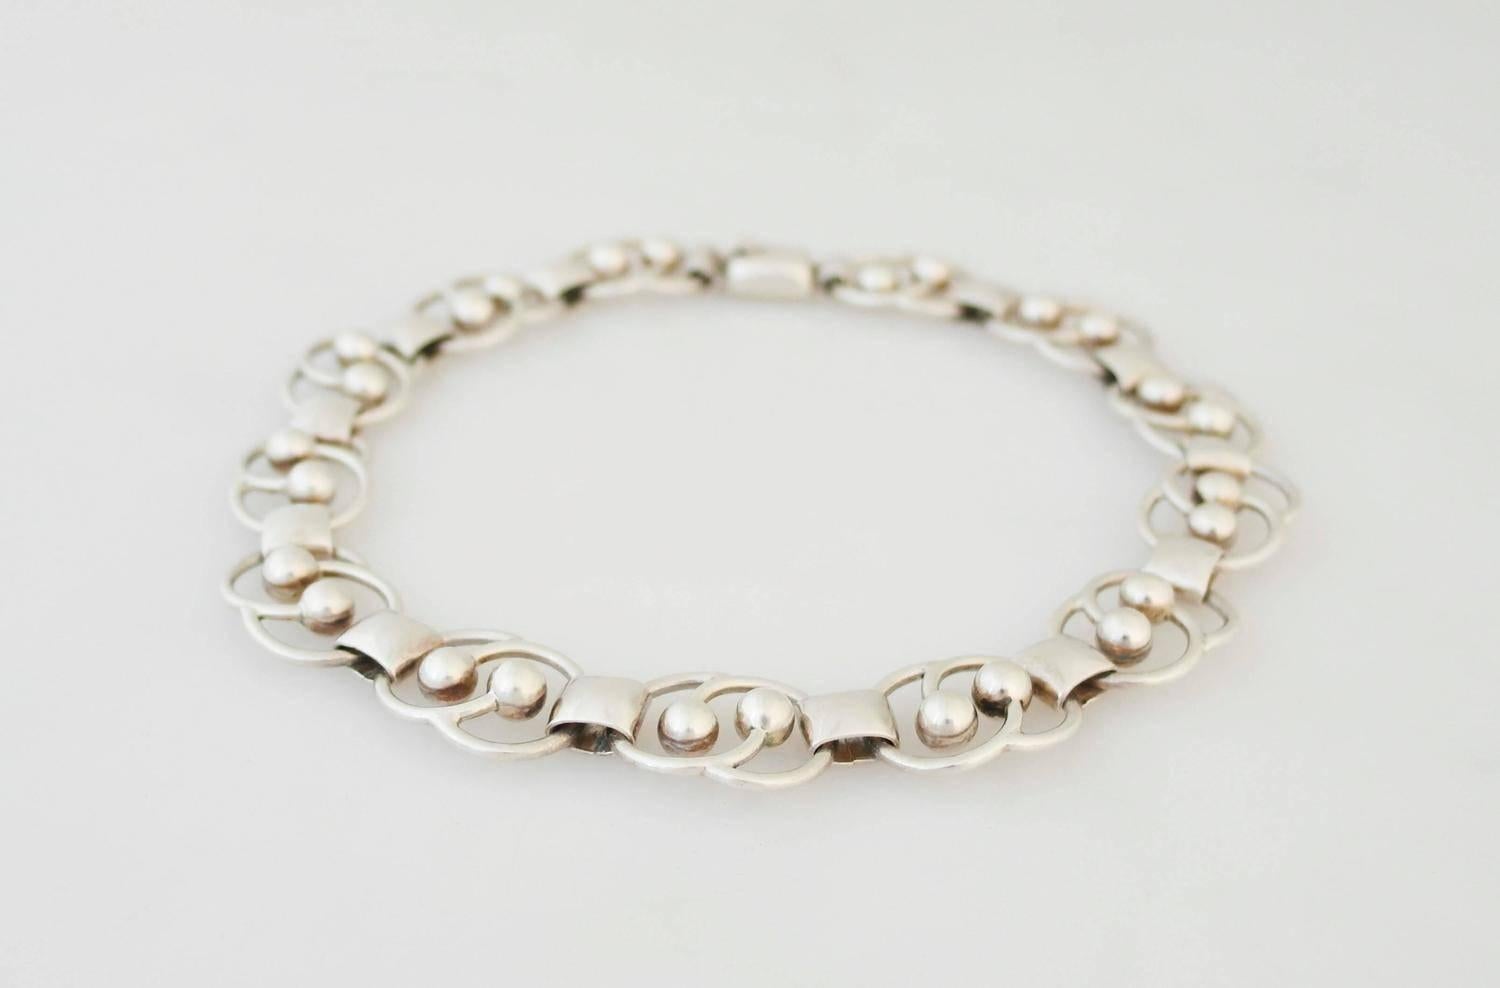 Early Hector Aguilar Sterling Silver Necklace 1955 Circular Link Motif For Sale 1